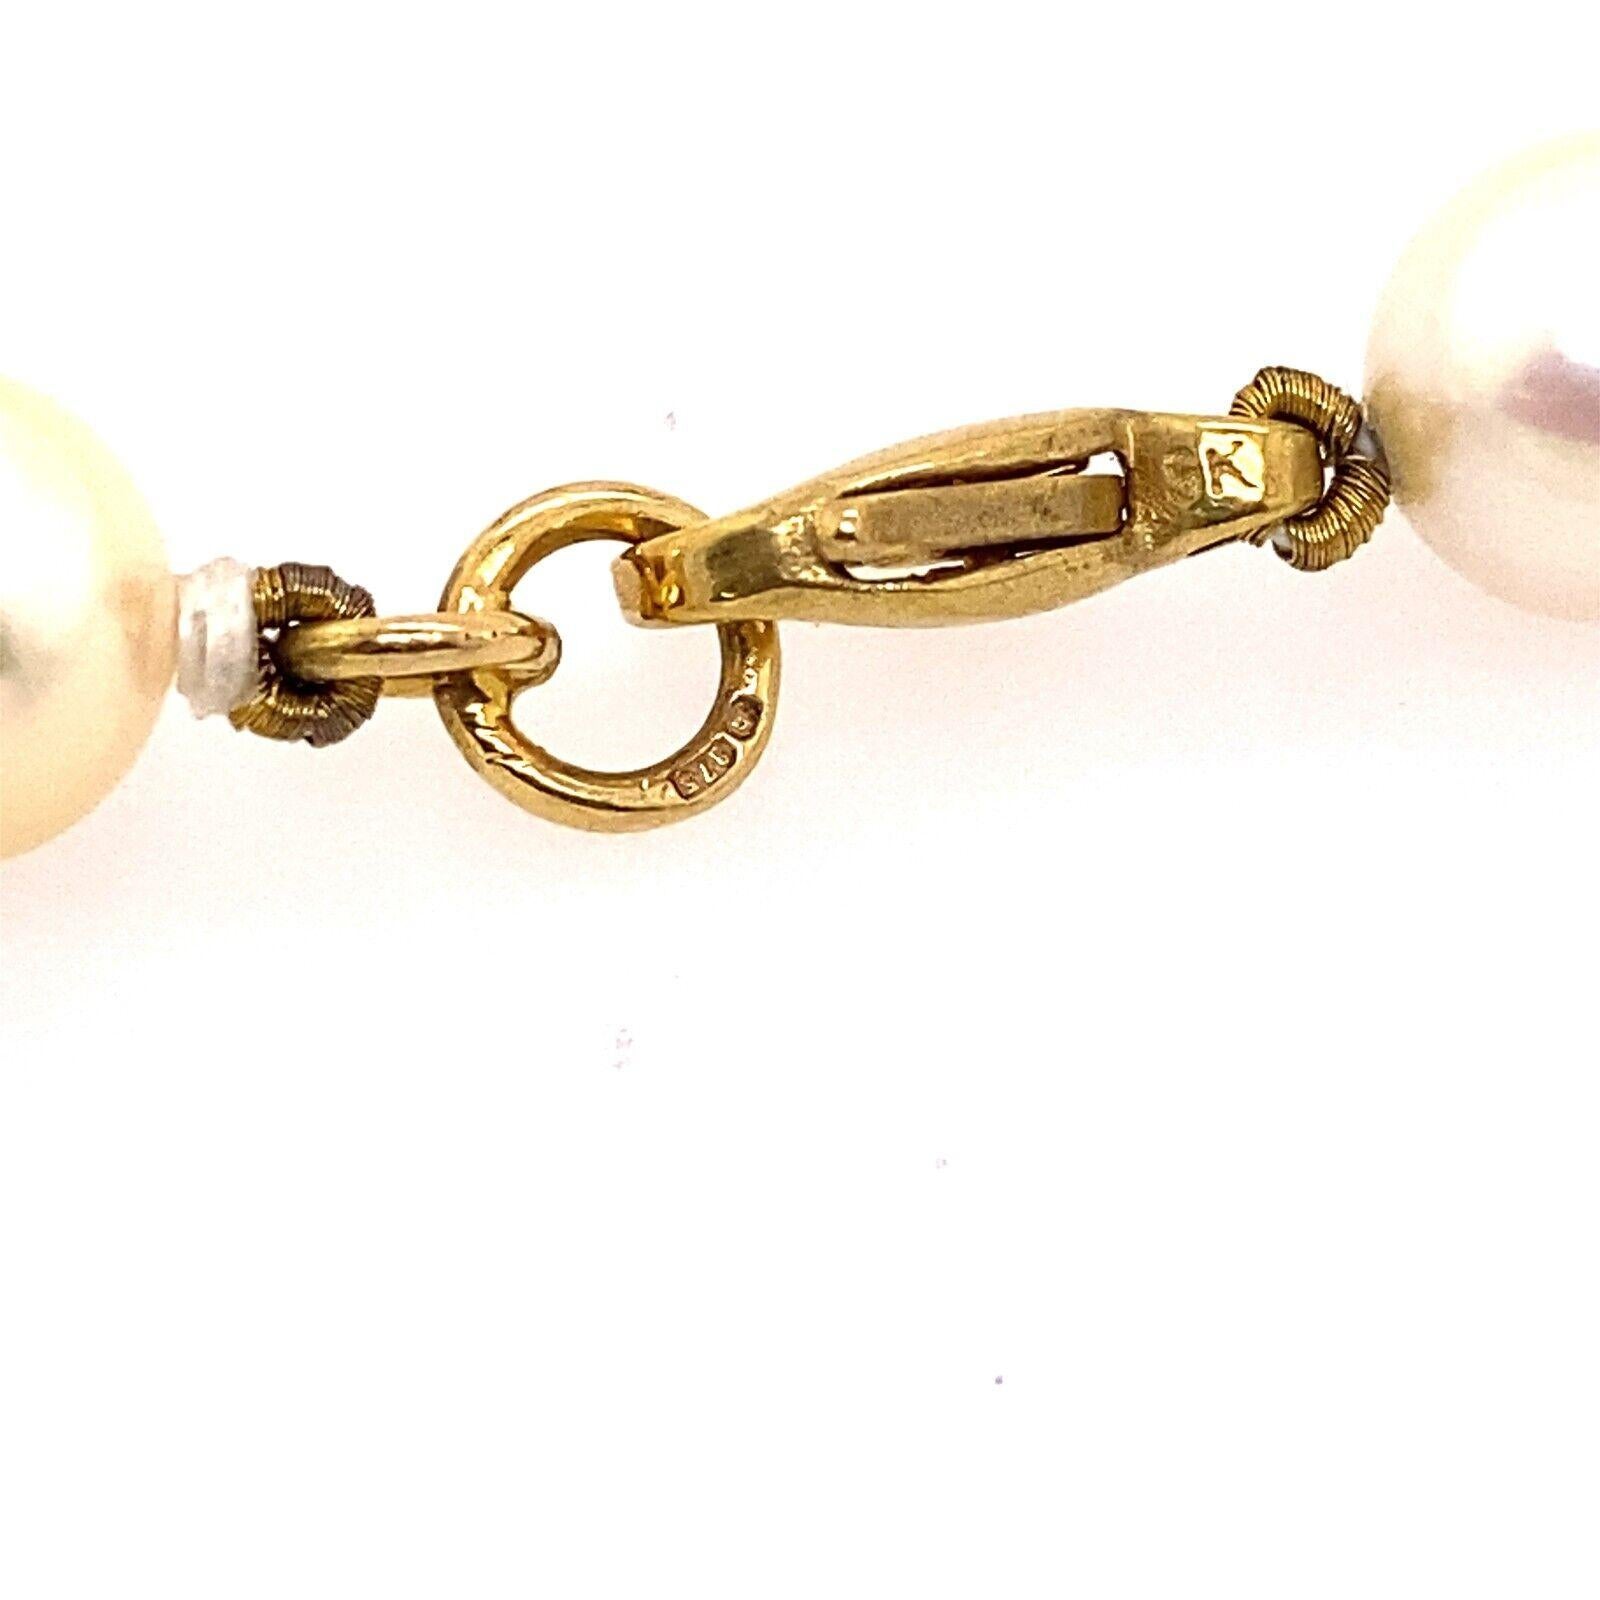 Perfect Matching 7mm Cultured Pearl Bracelet with 9ct Gold Beads in Between In Excellent Condition For Sale In London, GB